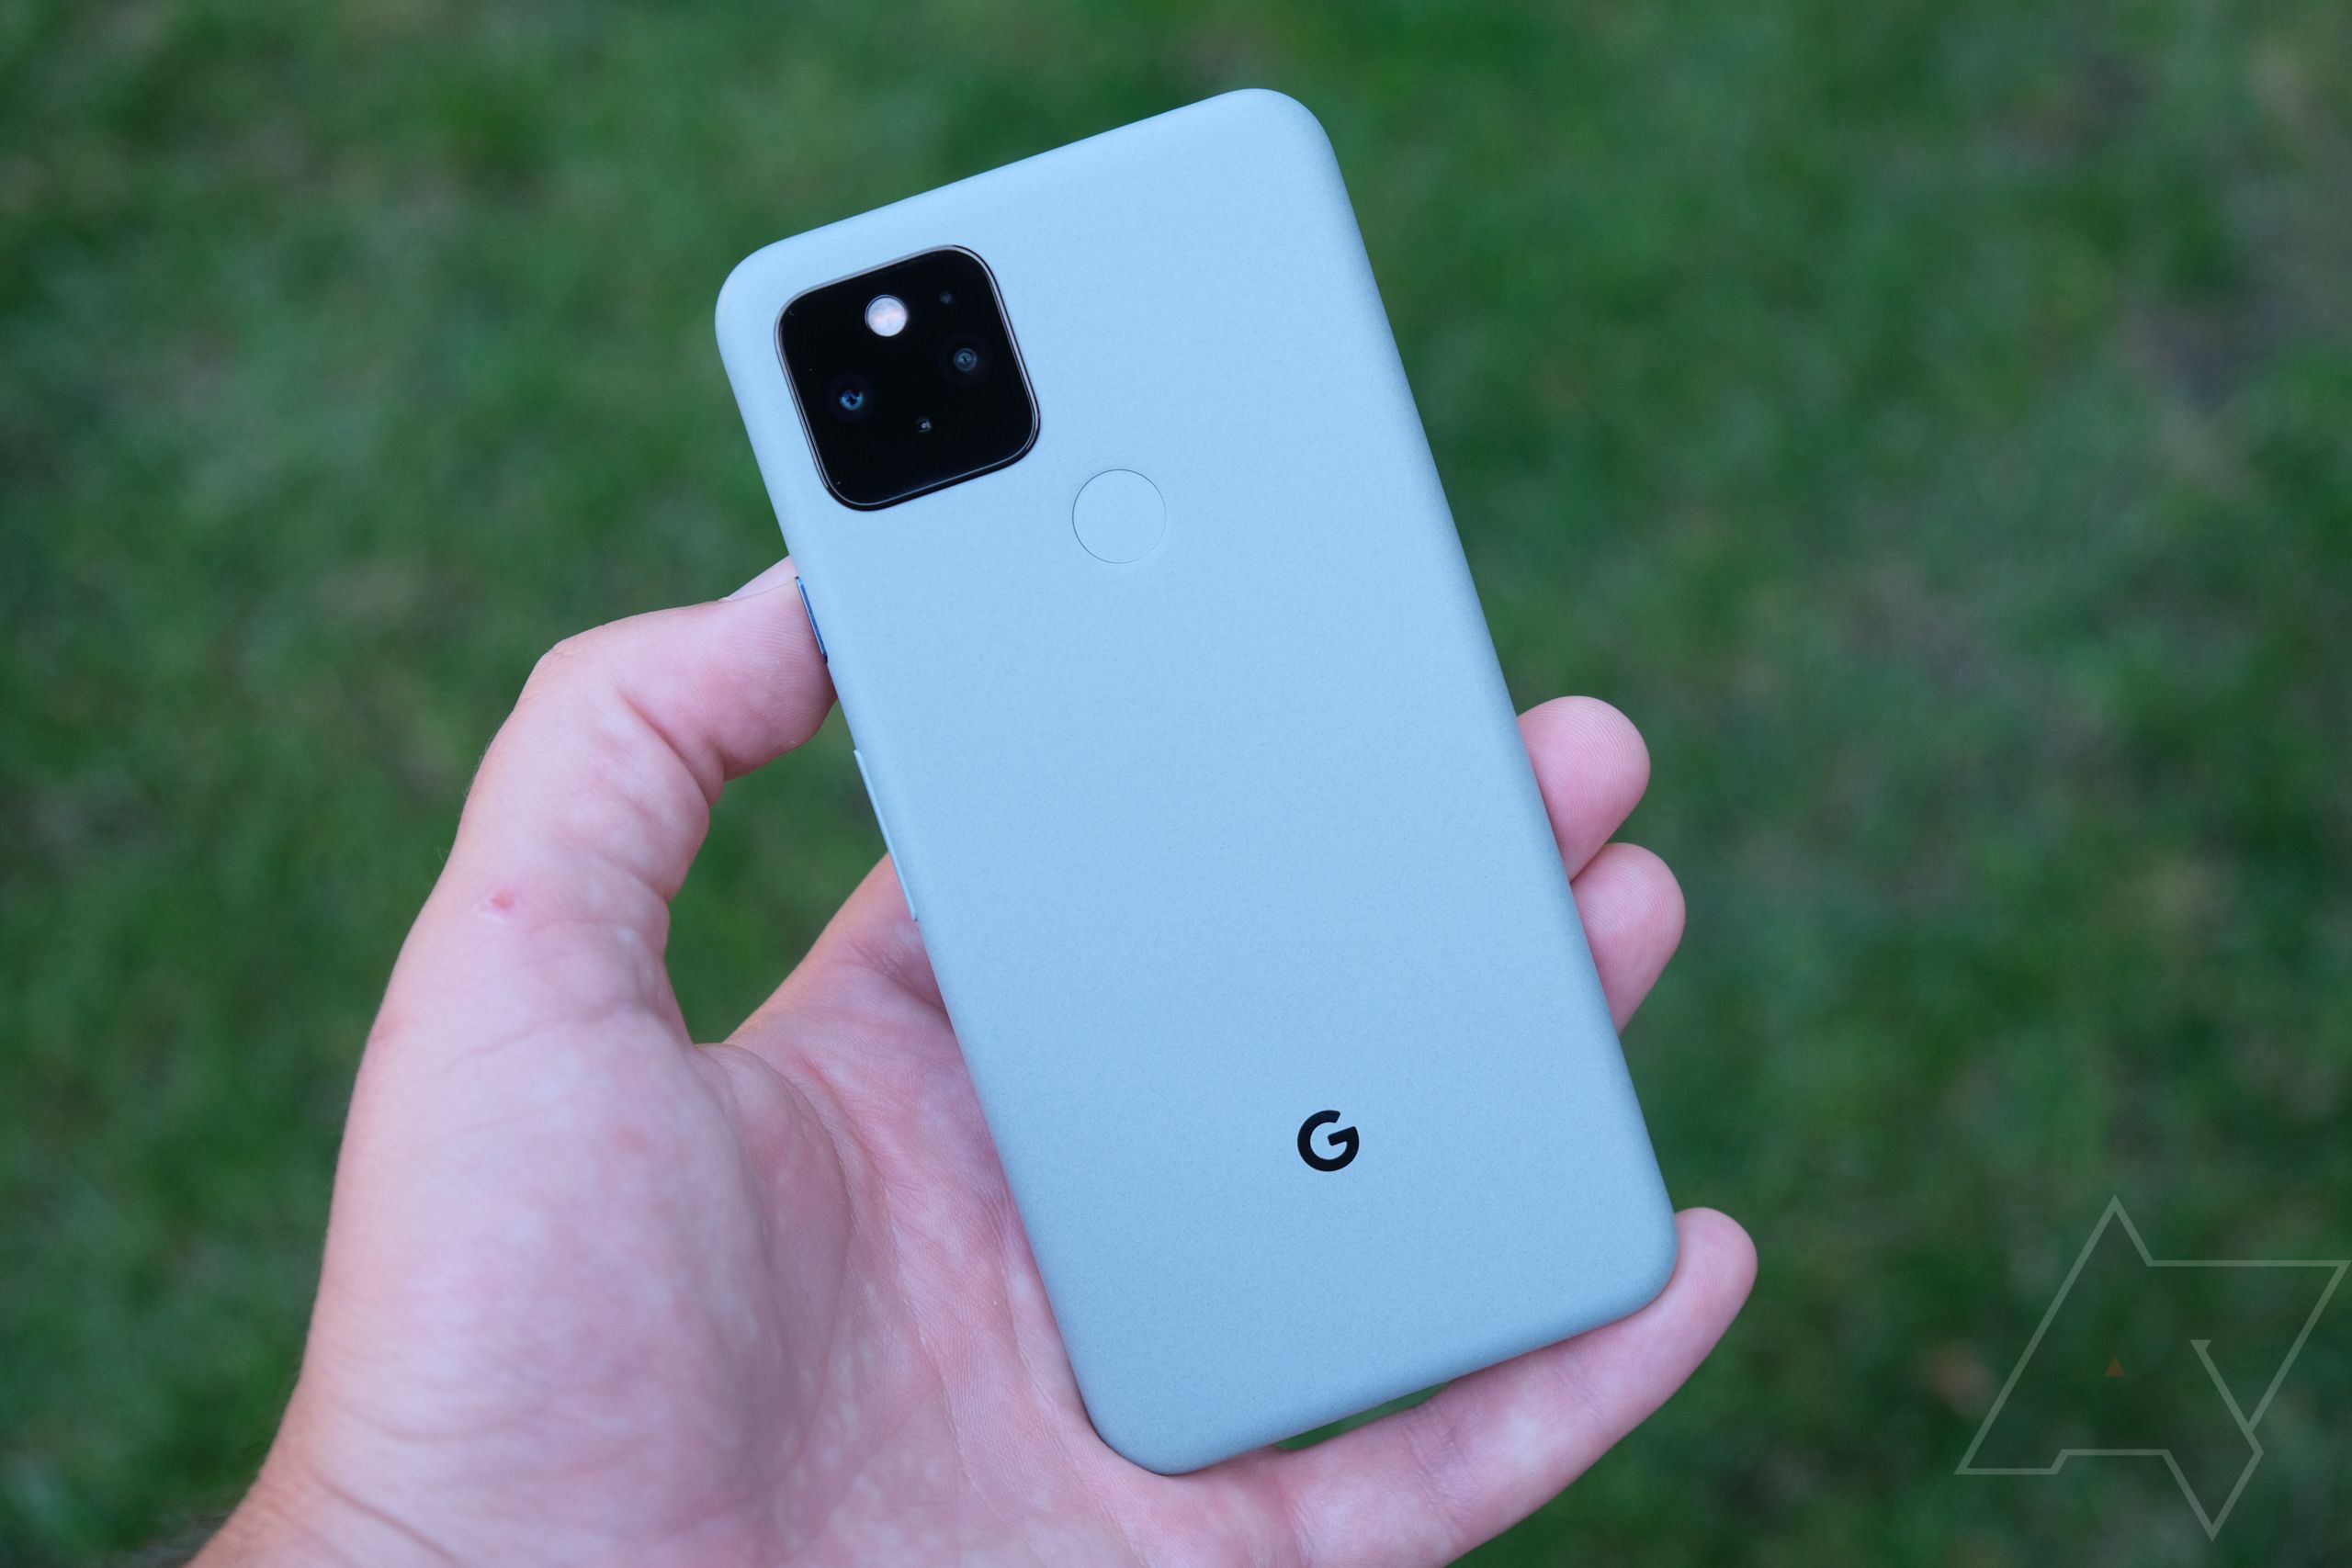 You can get your hands on a Pixel 5 starting today